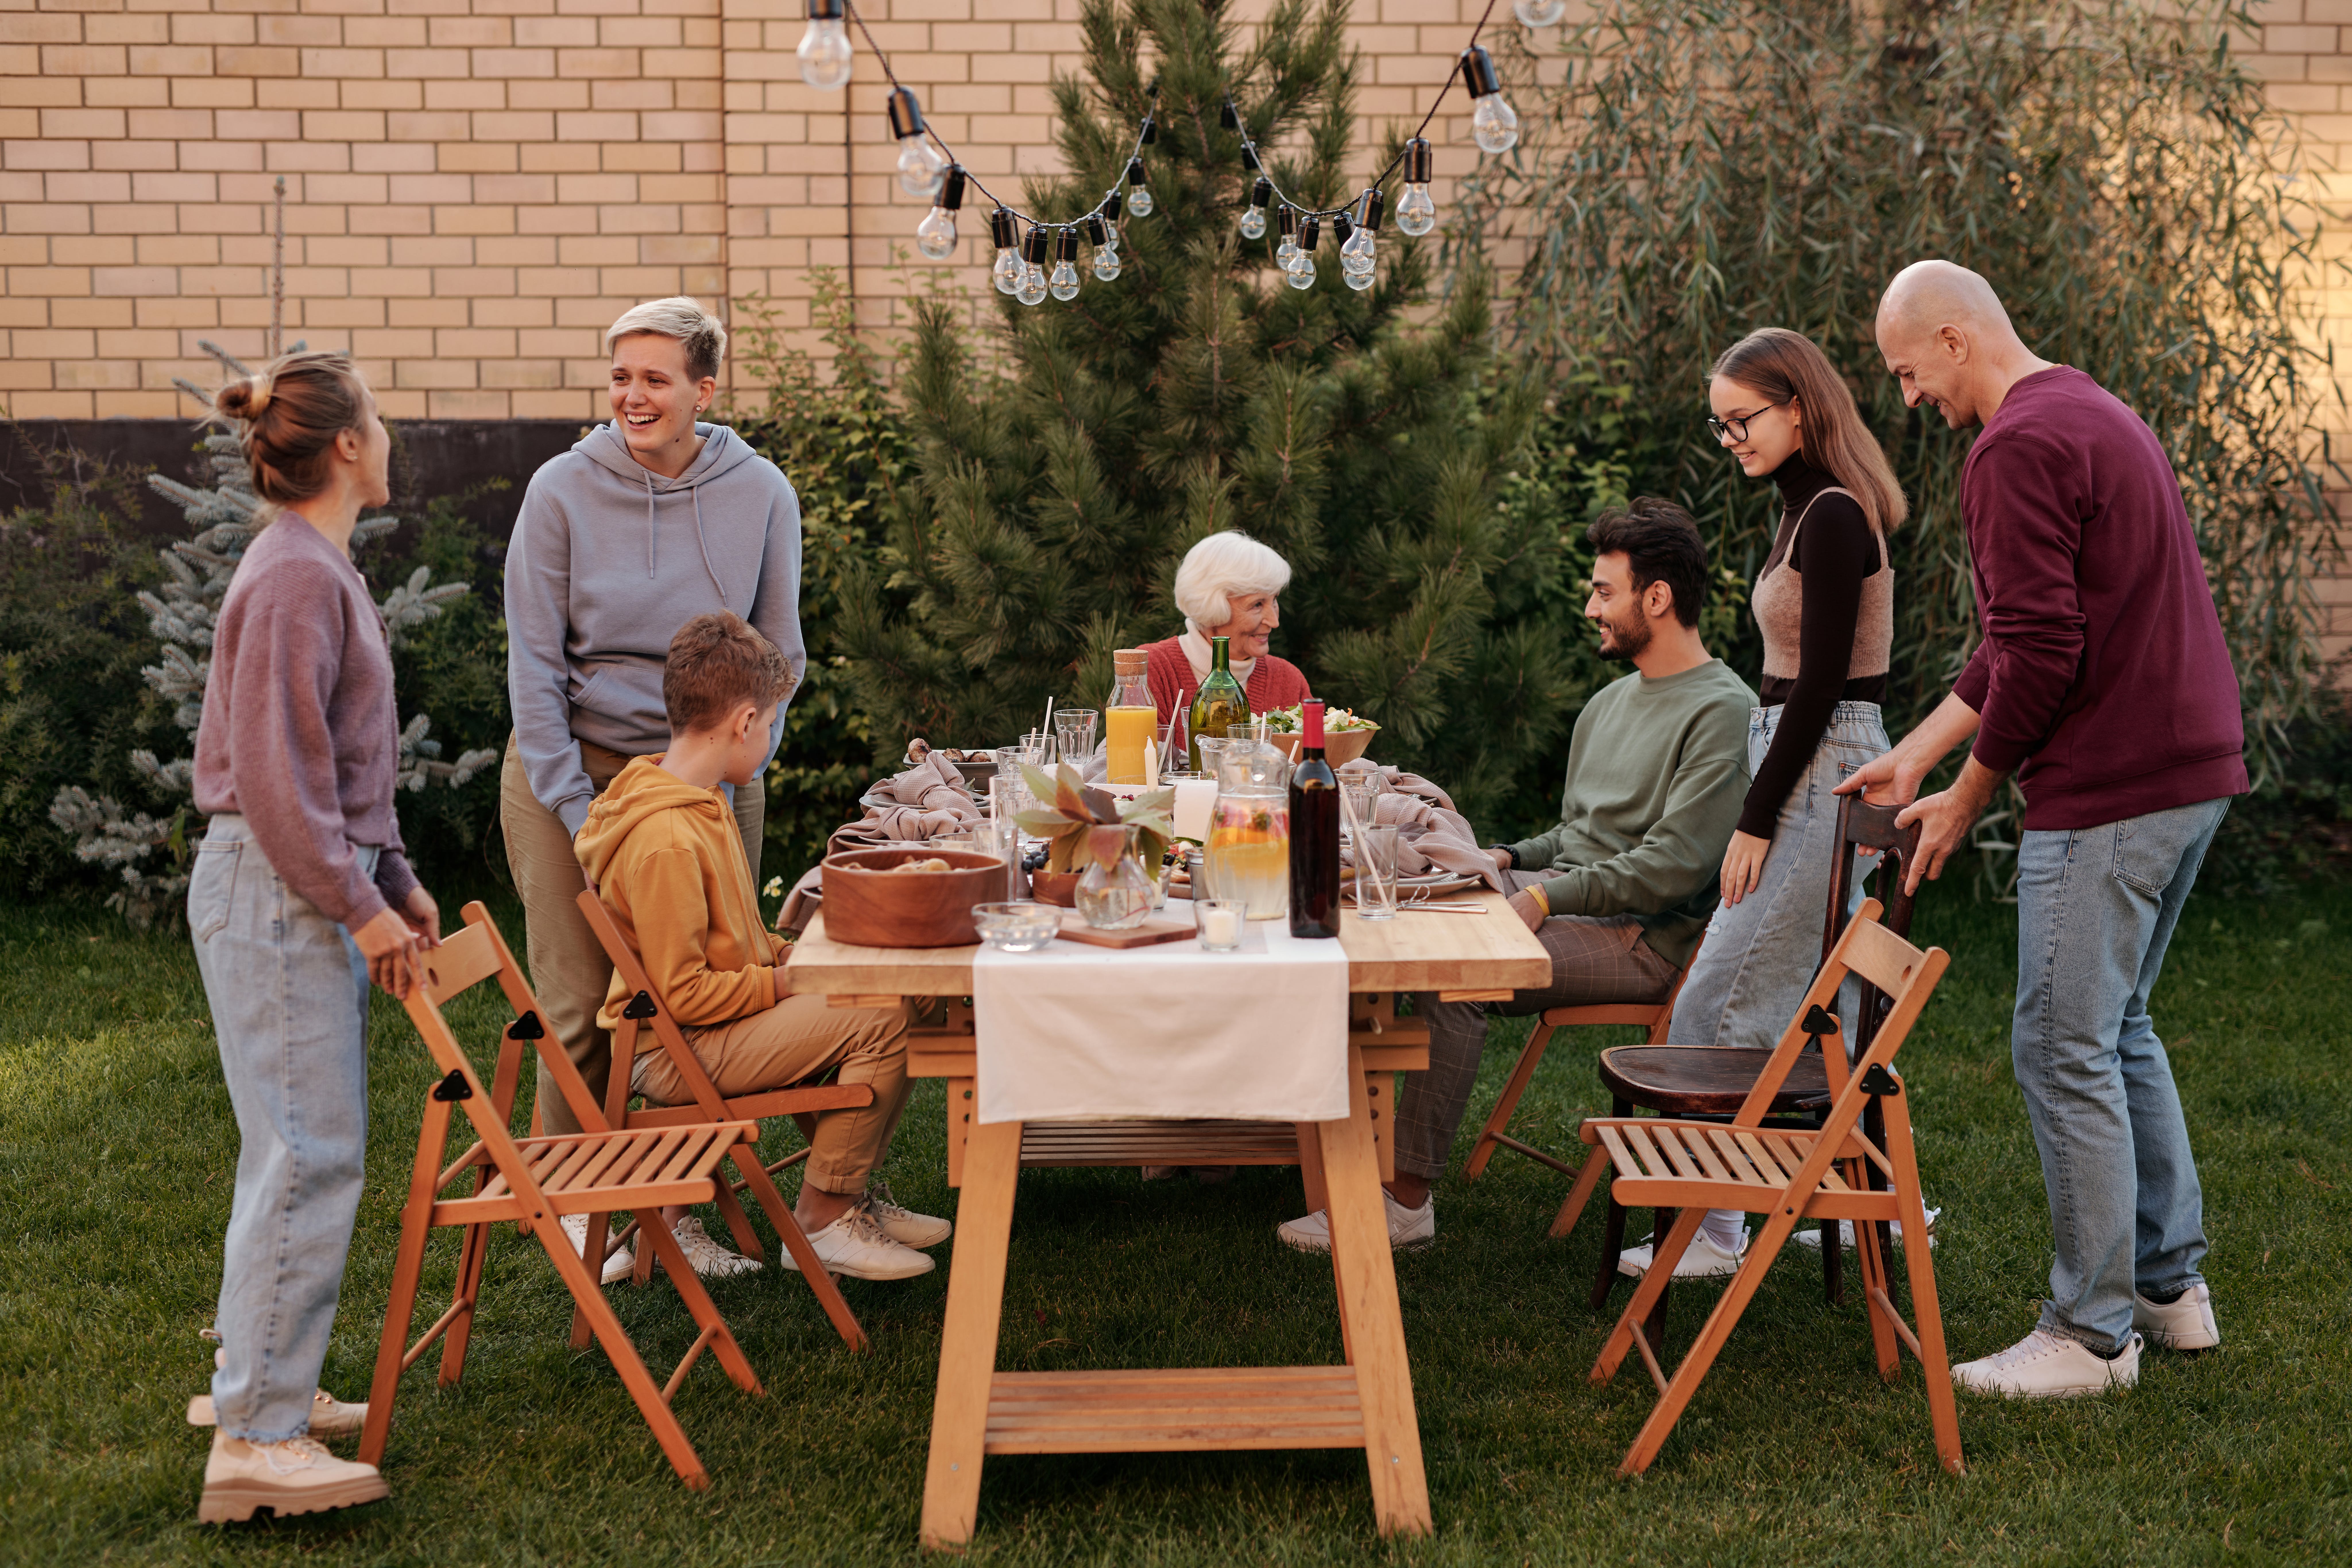 Blending Traditions: 5 Steps to a Peaceful Holiday with Your Blended Family